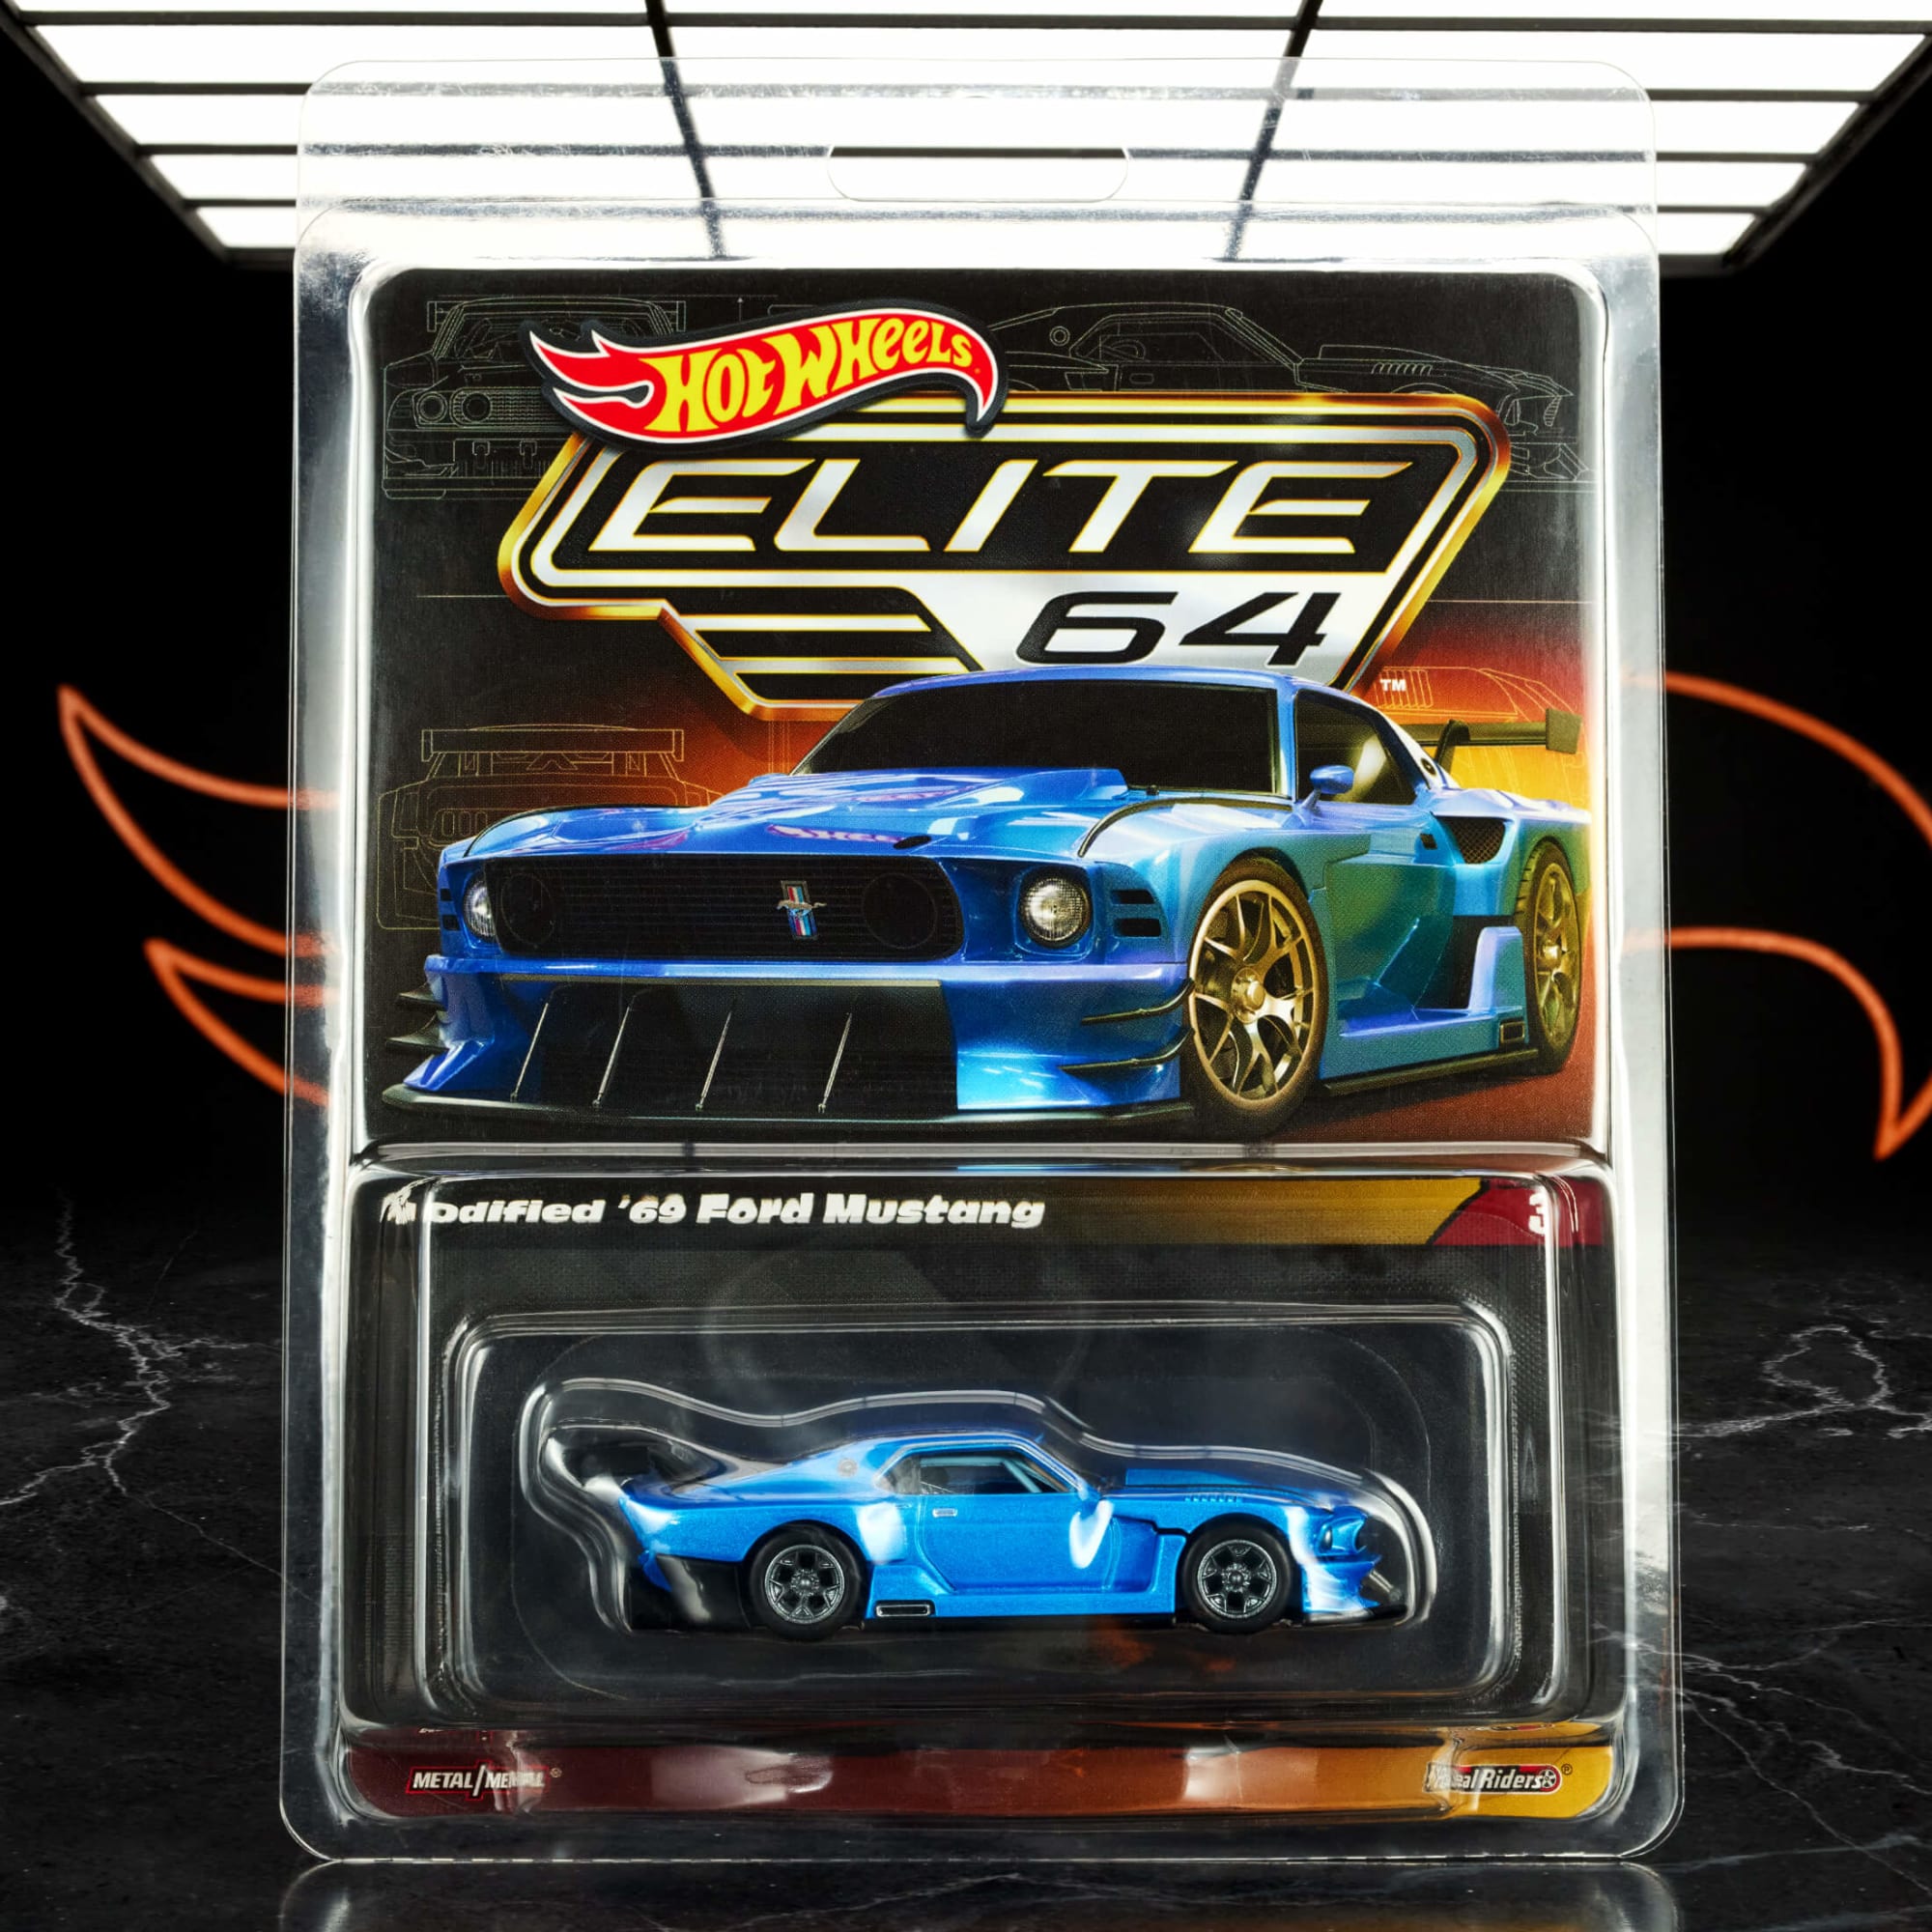 Hot Wheels Elite 64 Modified 69 Ford Mustang